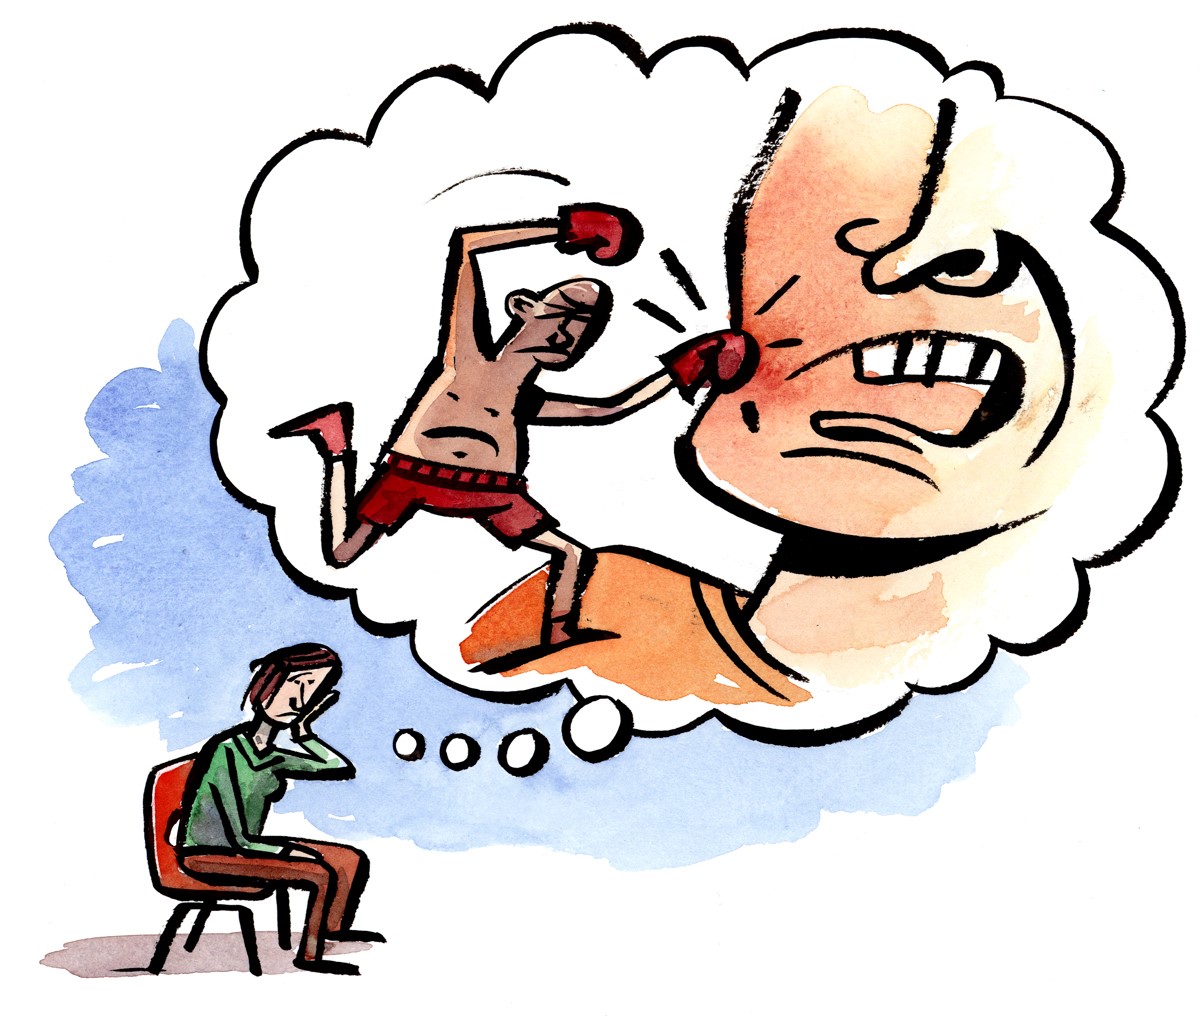 a person sits in a chair with their hand on their cheek. A large thought bubble shows a boxer punching the person in the side of the face.